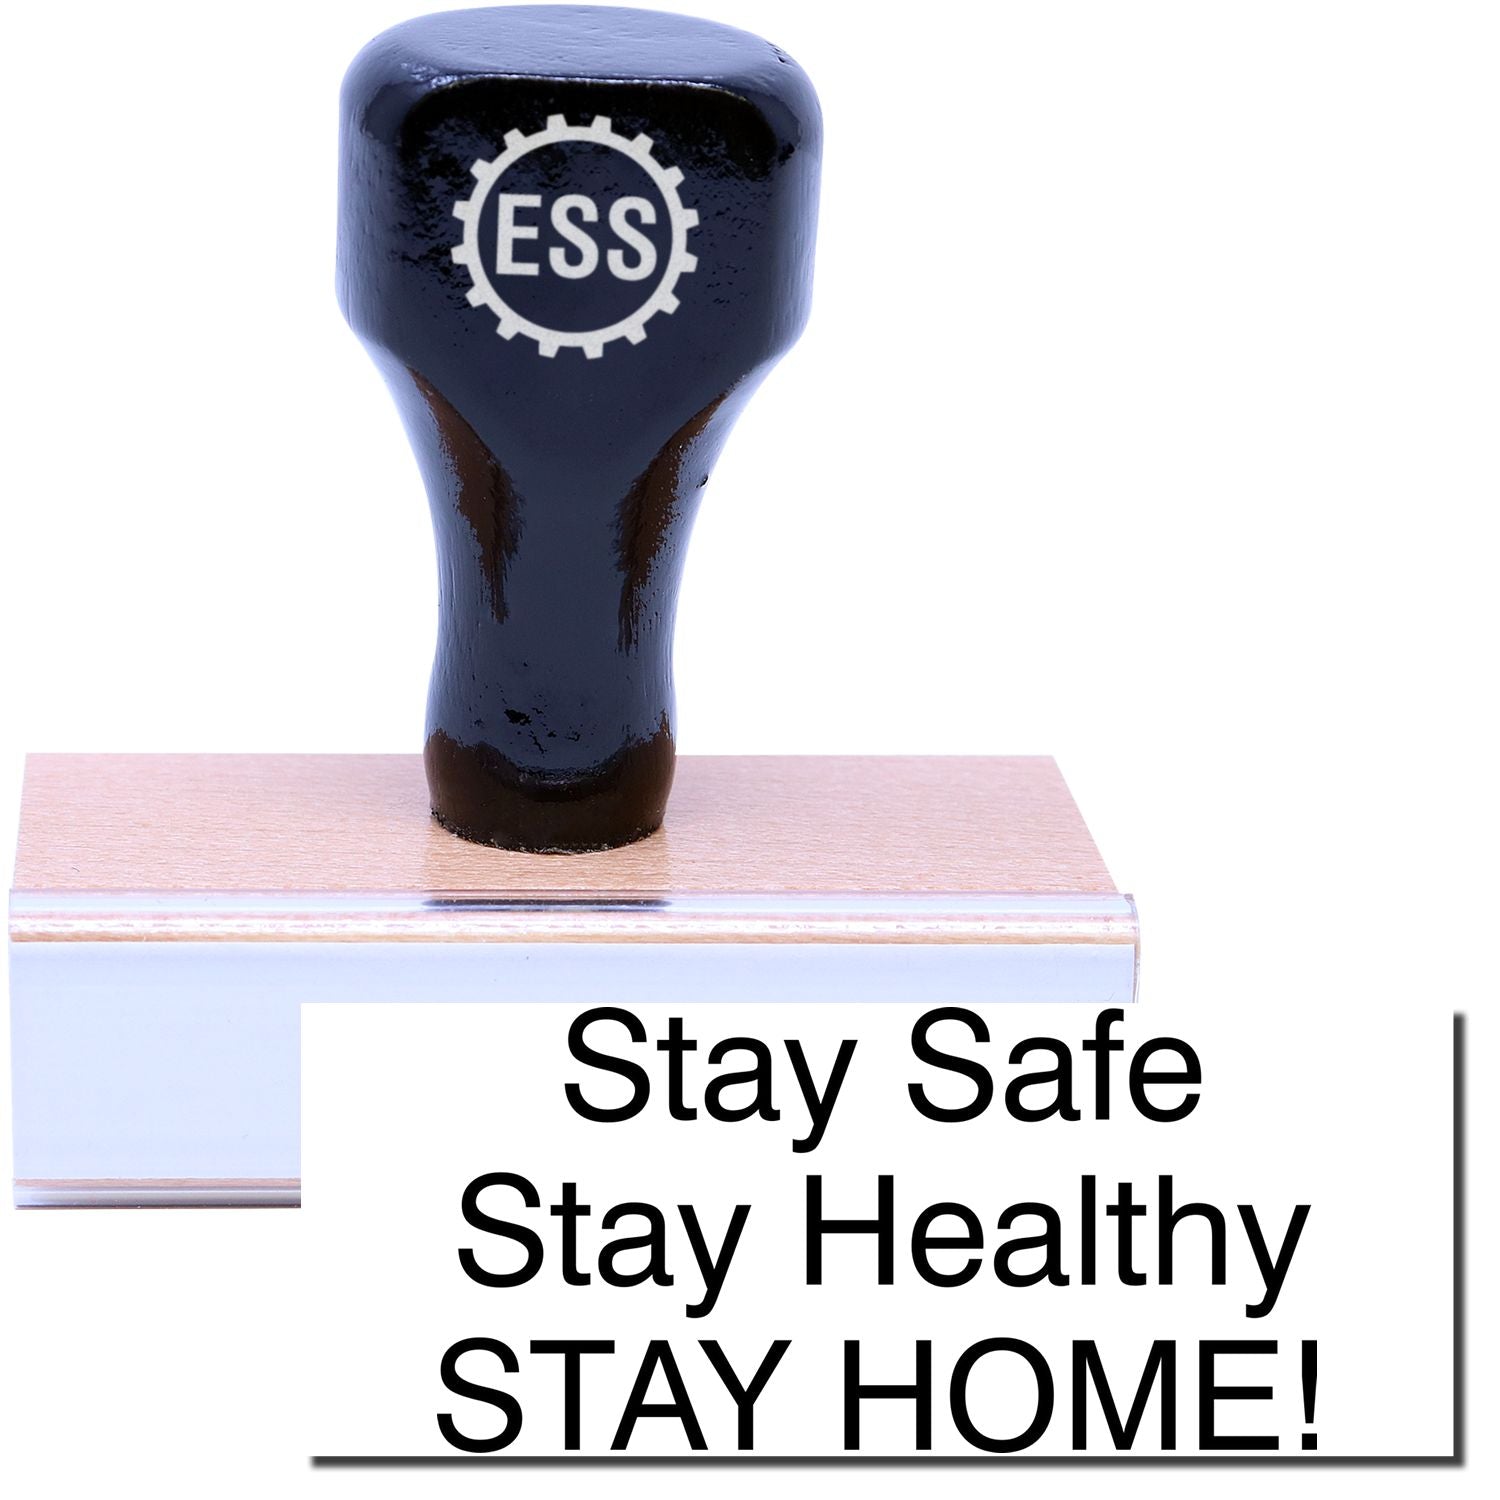 A stock office rubber stamp with a stamped image showing how the text "Stay Safe Stay Healthy STAY HOME!" in a large font is displayed after stamping.